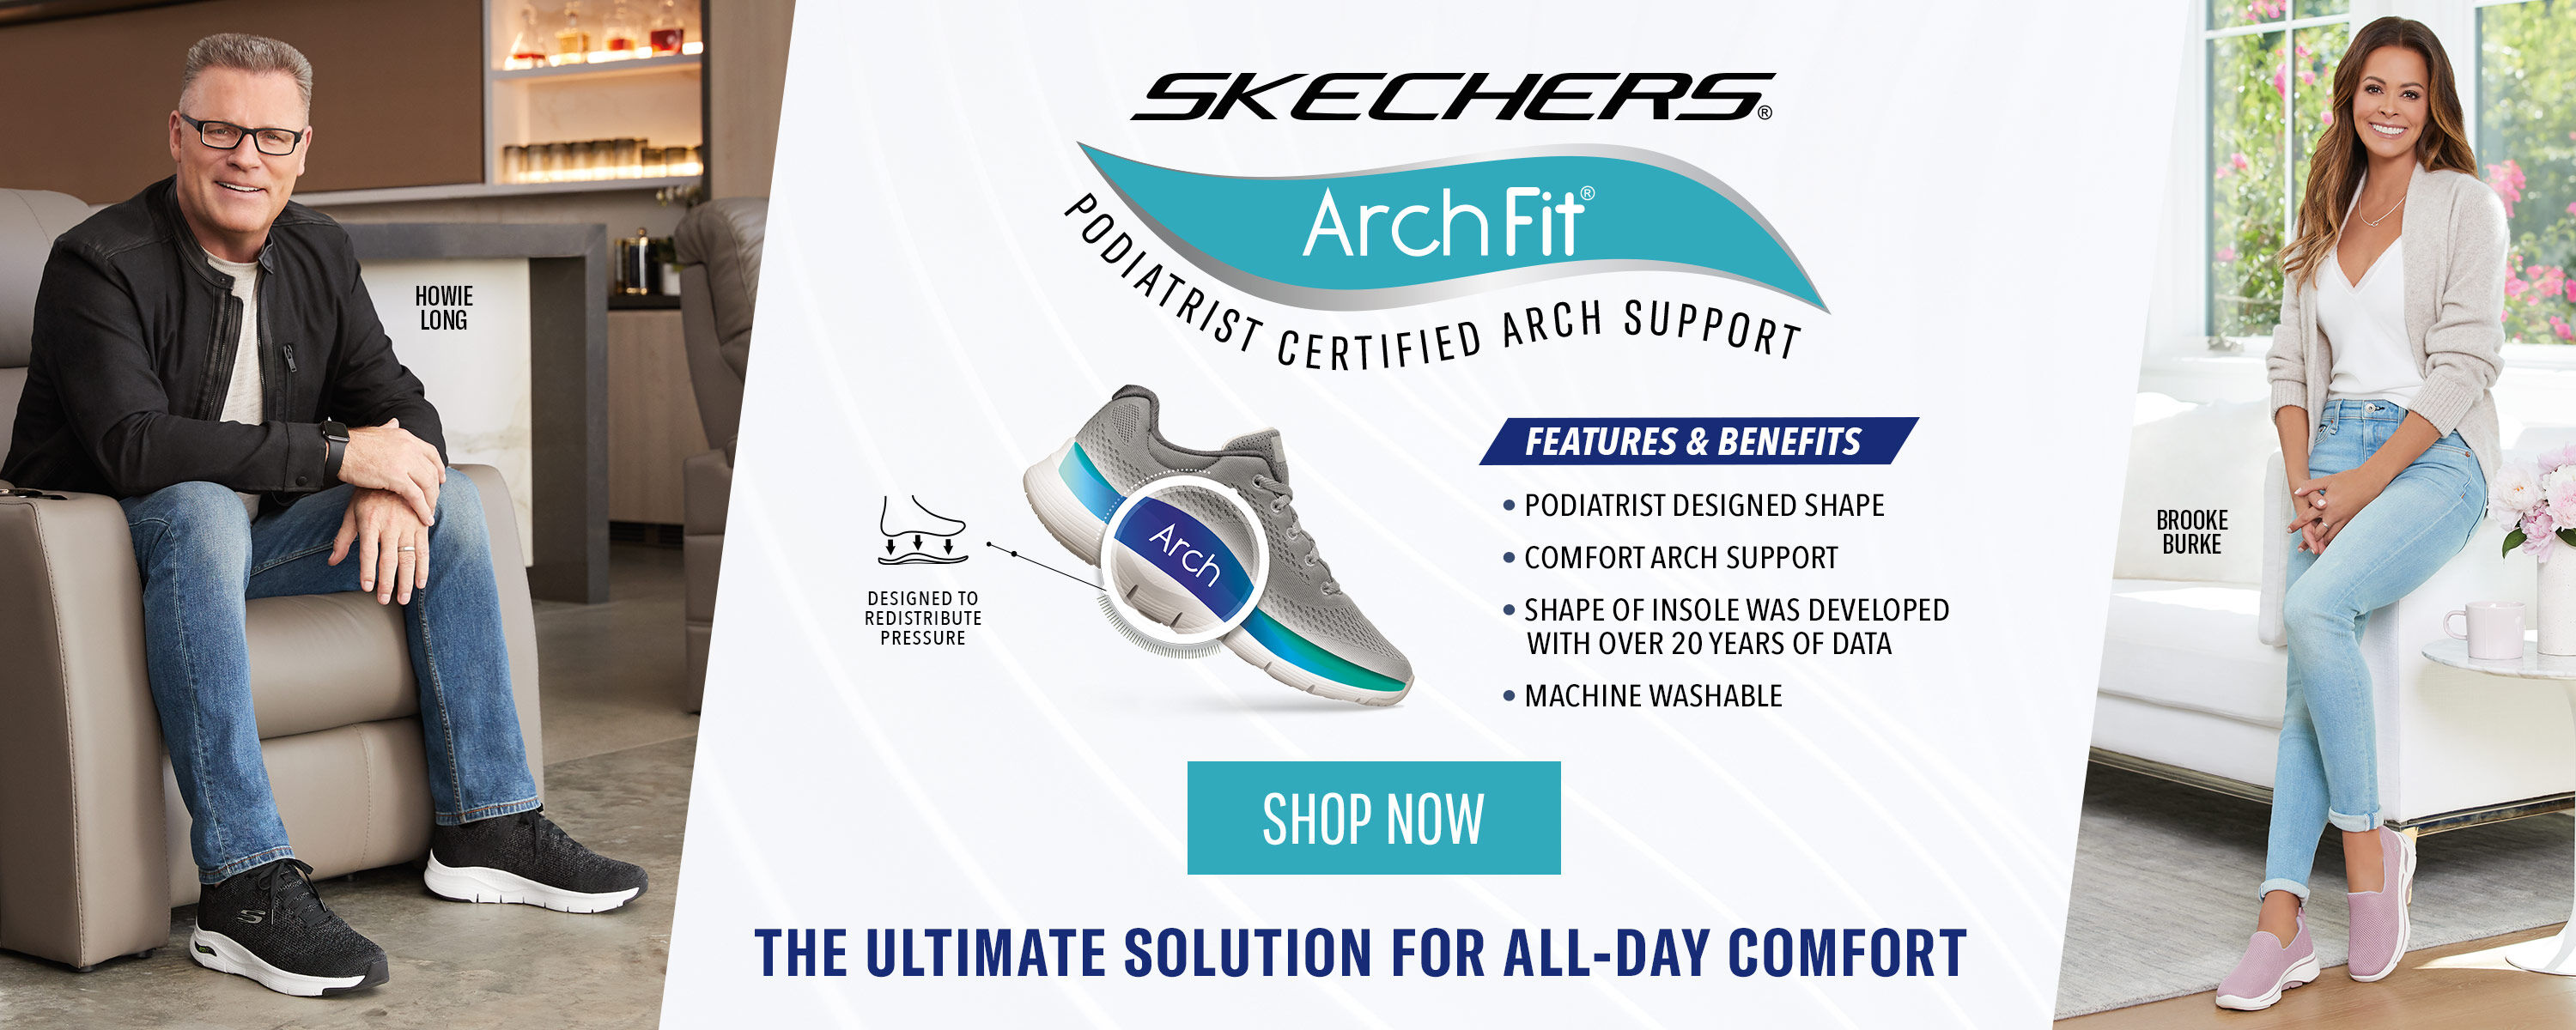 skechers outlet near me now